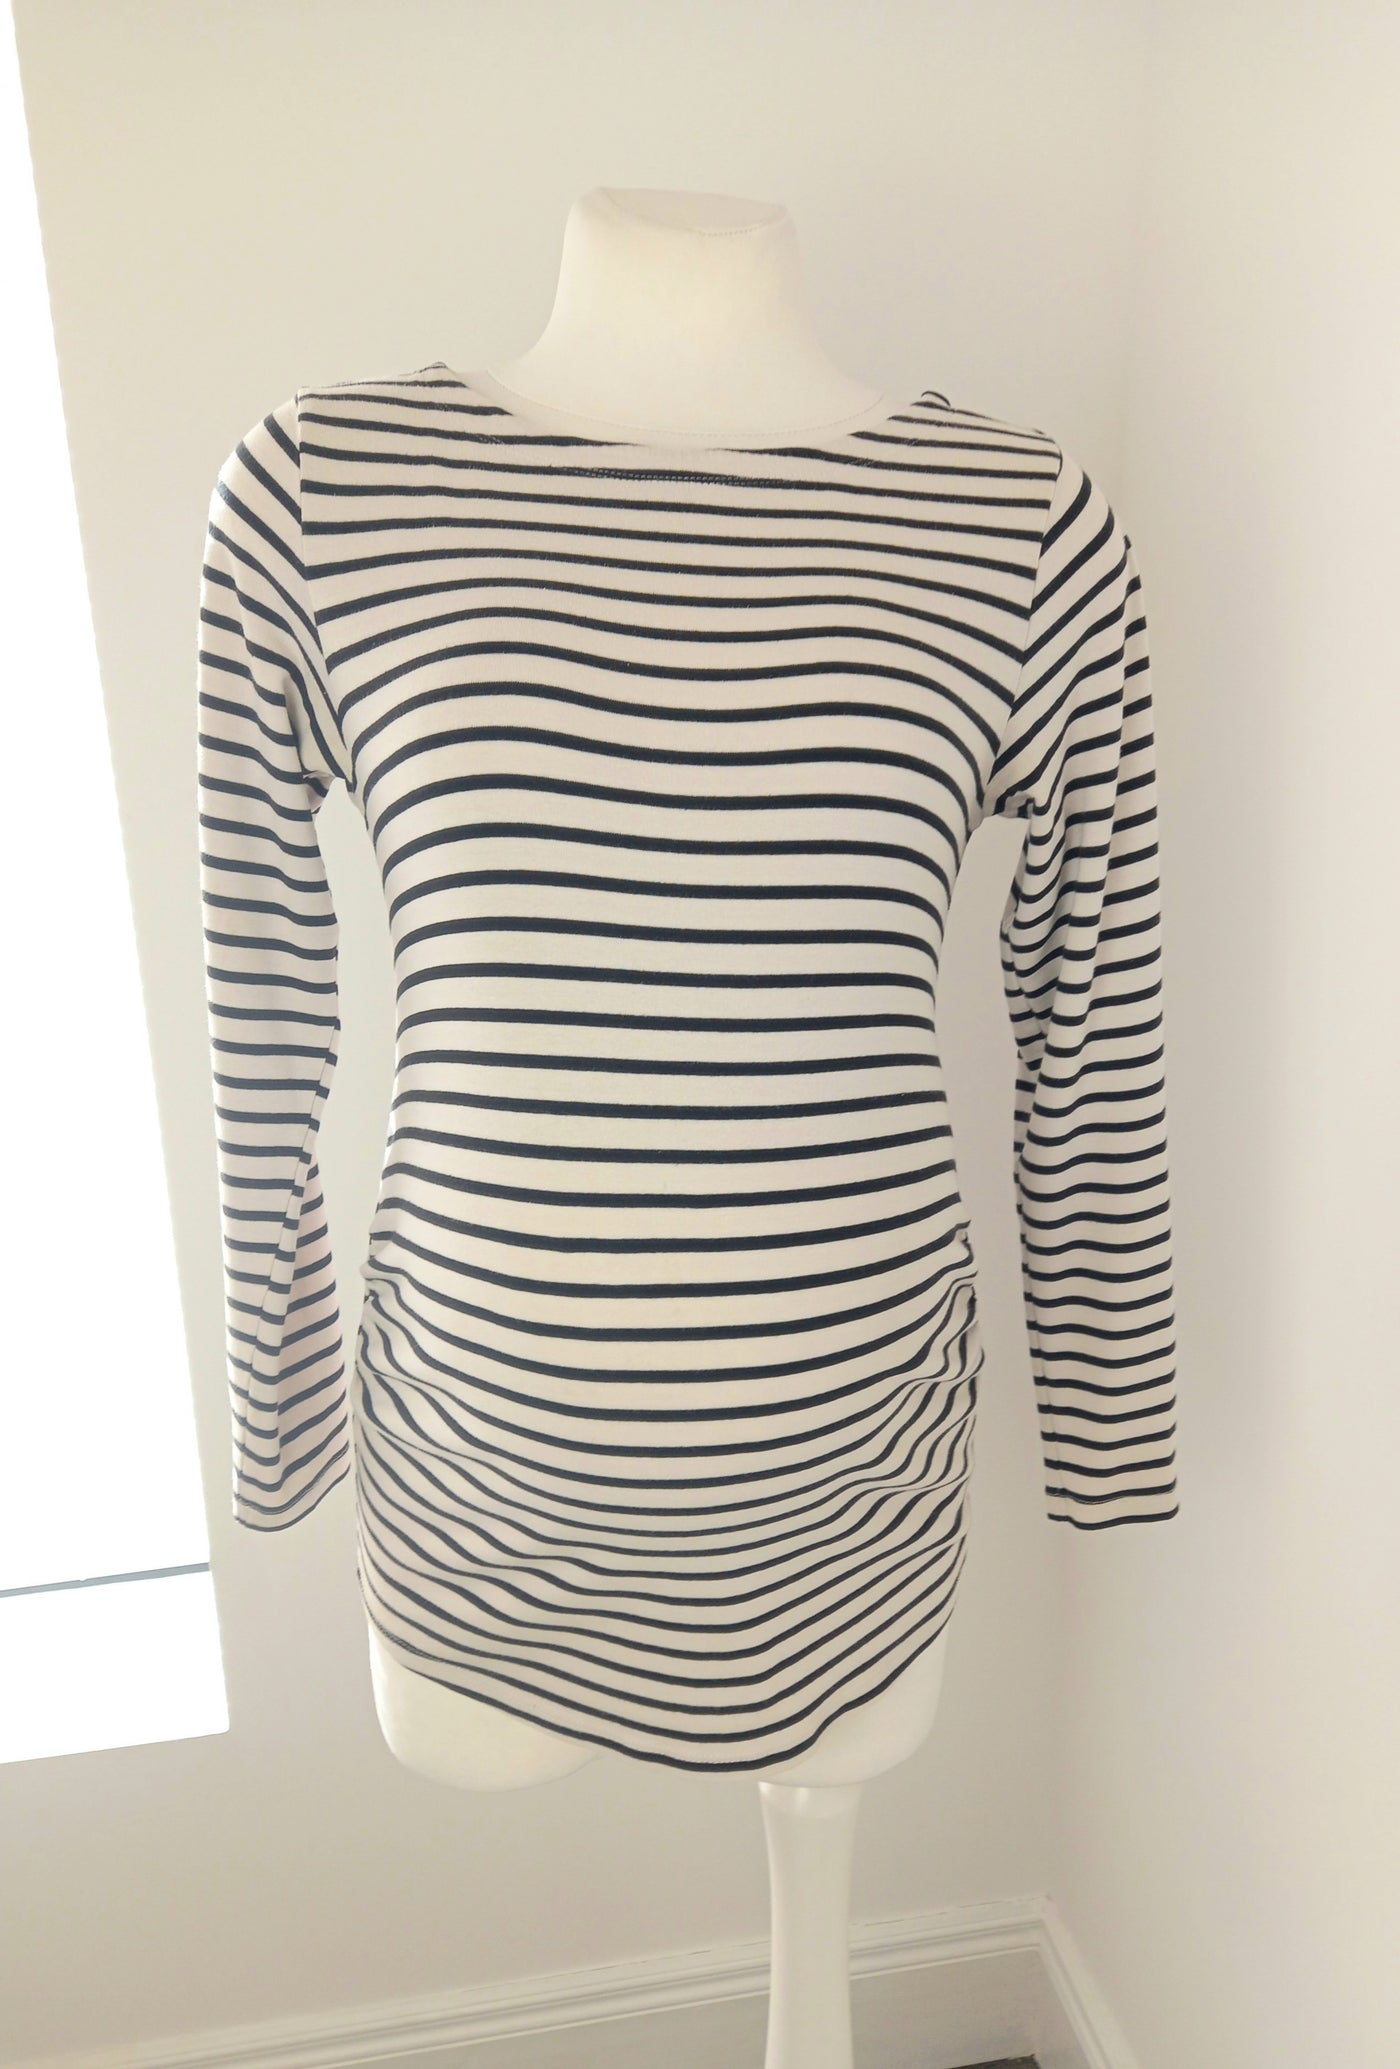 H&M Mama beige & black striped long sleeve top - Size L (Approx UK 12/14)